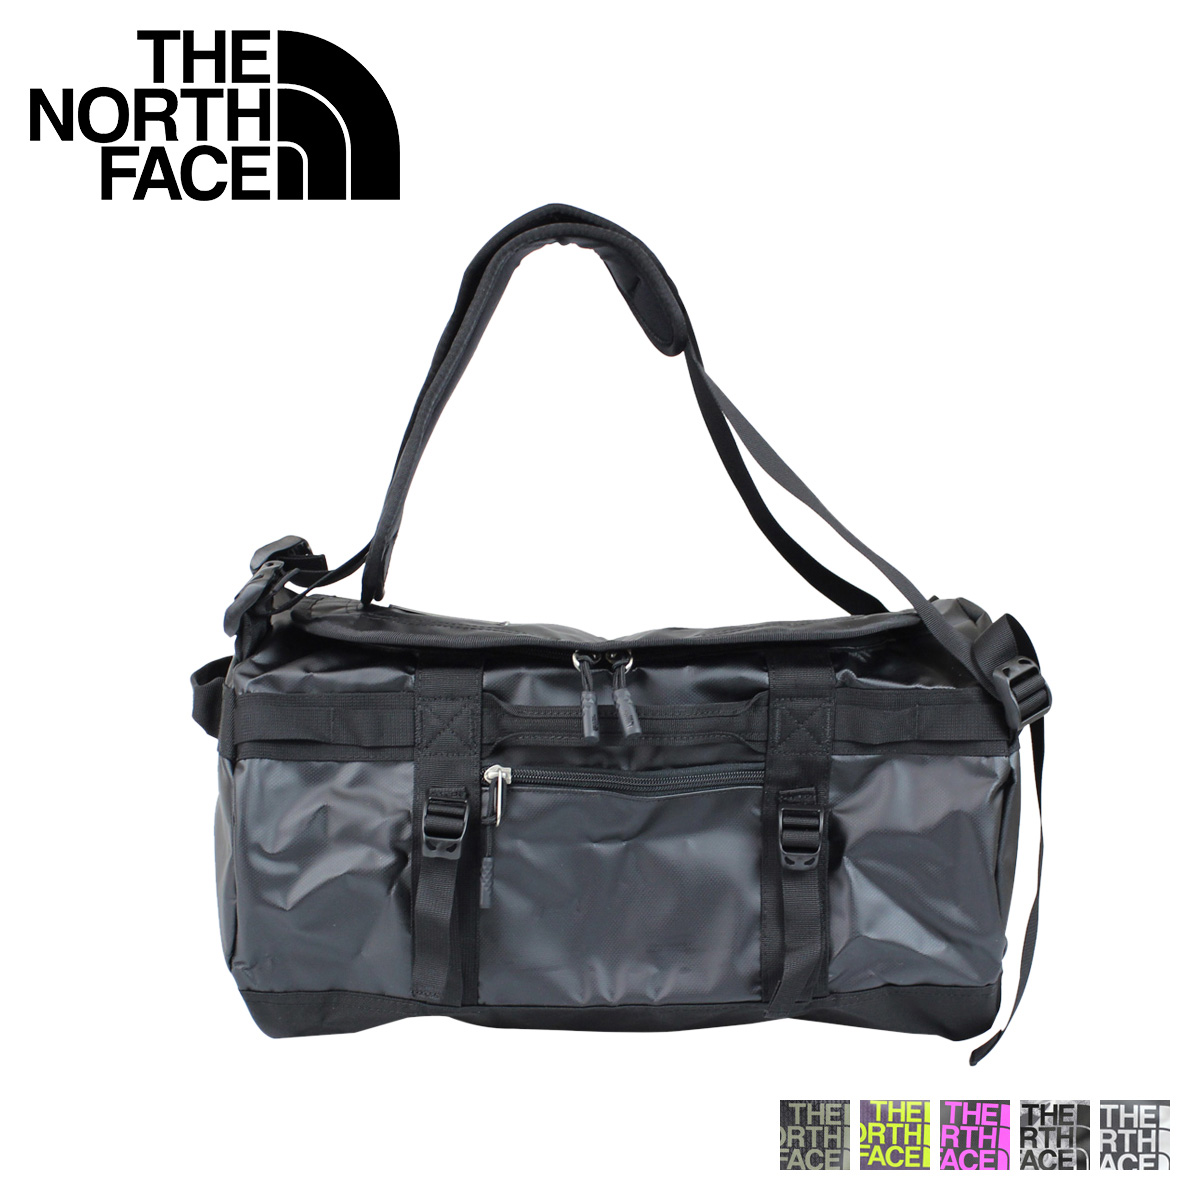 Duffel North Face Xs Cheaper Than Retail Price Buy Clothing Accessories And Lifestyle Products For Women Men